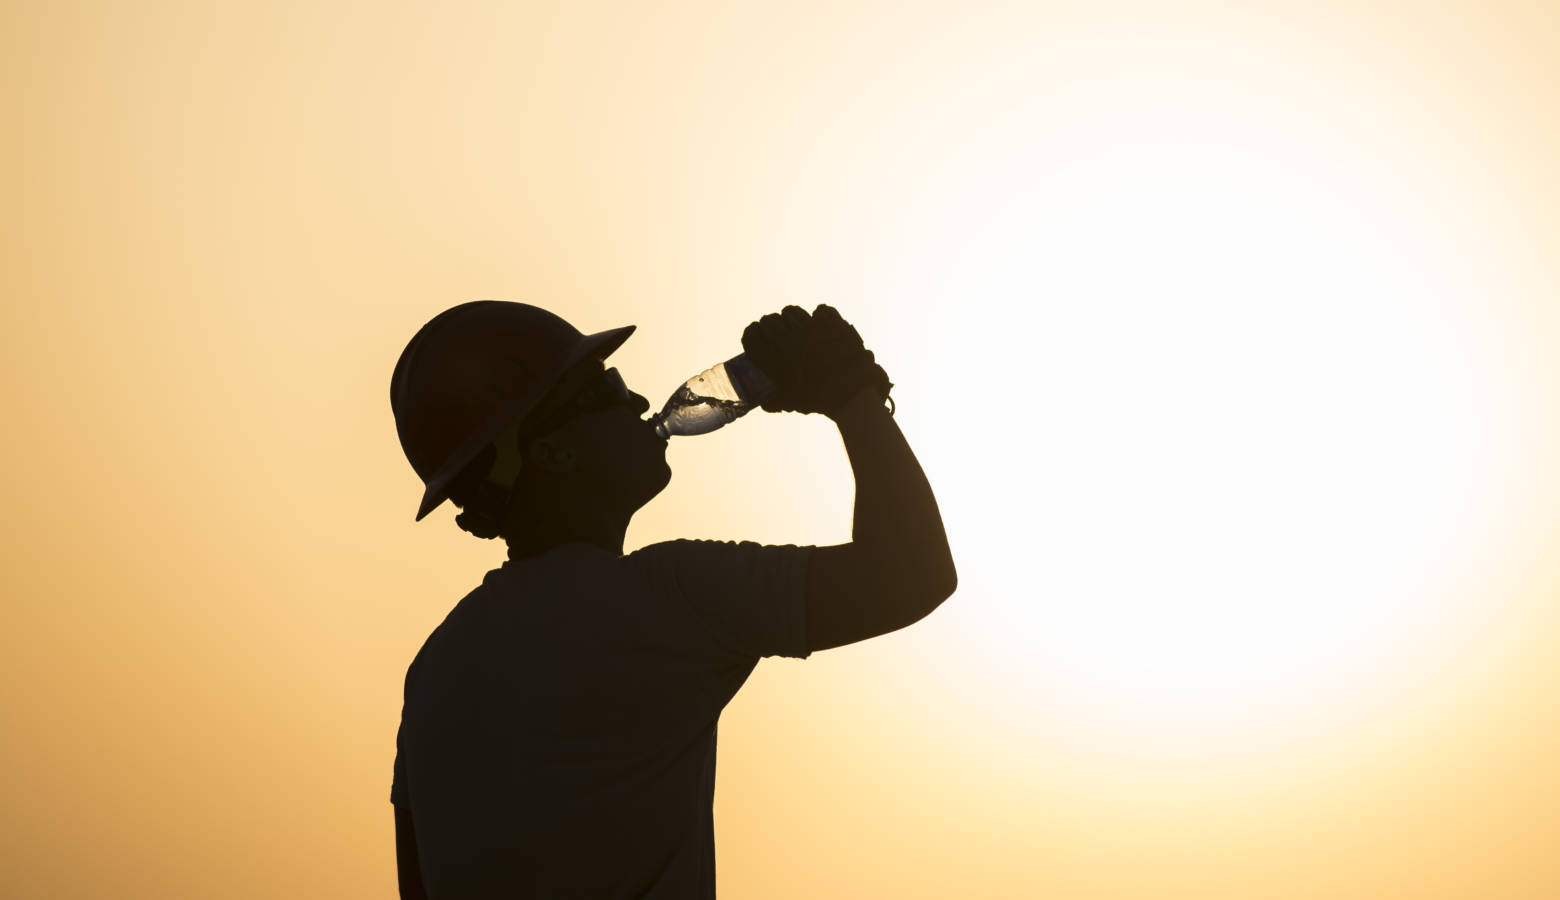 A U.S. airman drinks water while working on a construction site in extreme heat in Southwest Asia, 2017. (U.S. Air Force/Damon Kasberg)